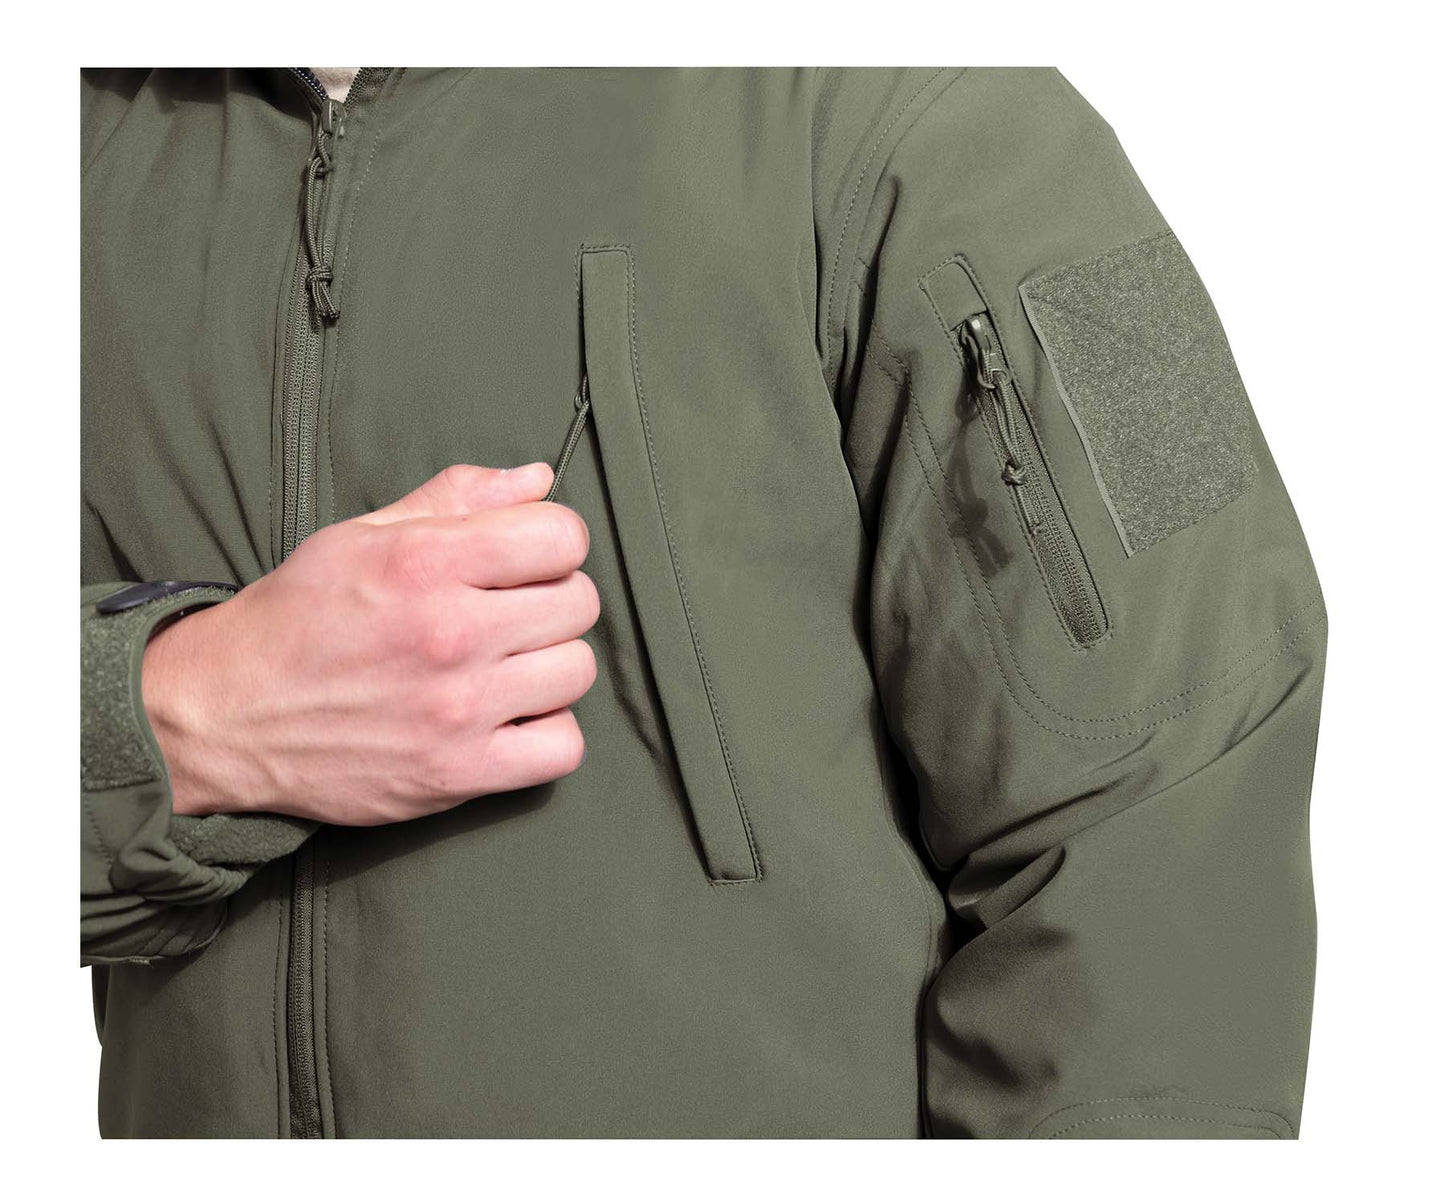 Milspec 3-in-1 Spec Ops Soft Shell Jacket Soft Shell Jackets MilTac Tactical Military Outdoor Gear Australia